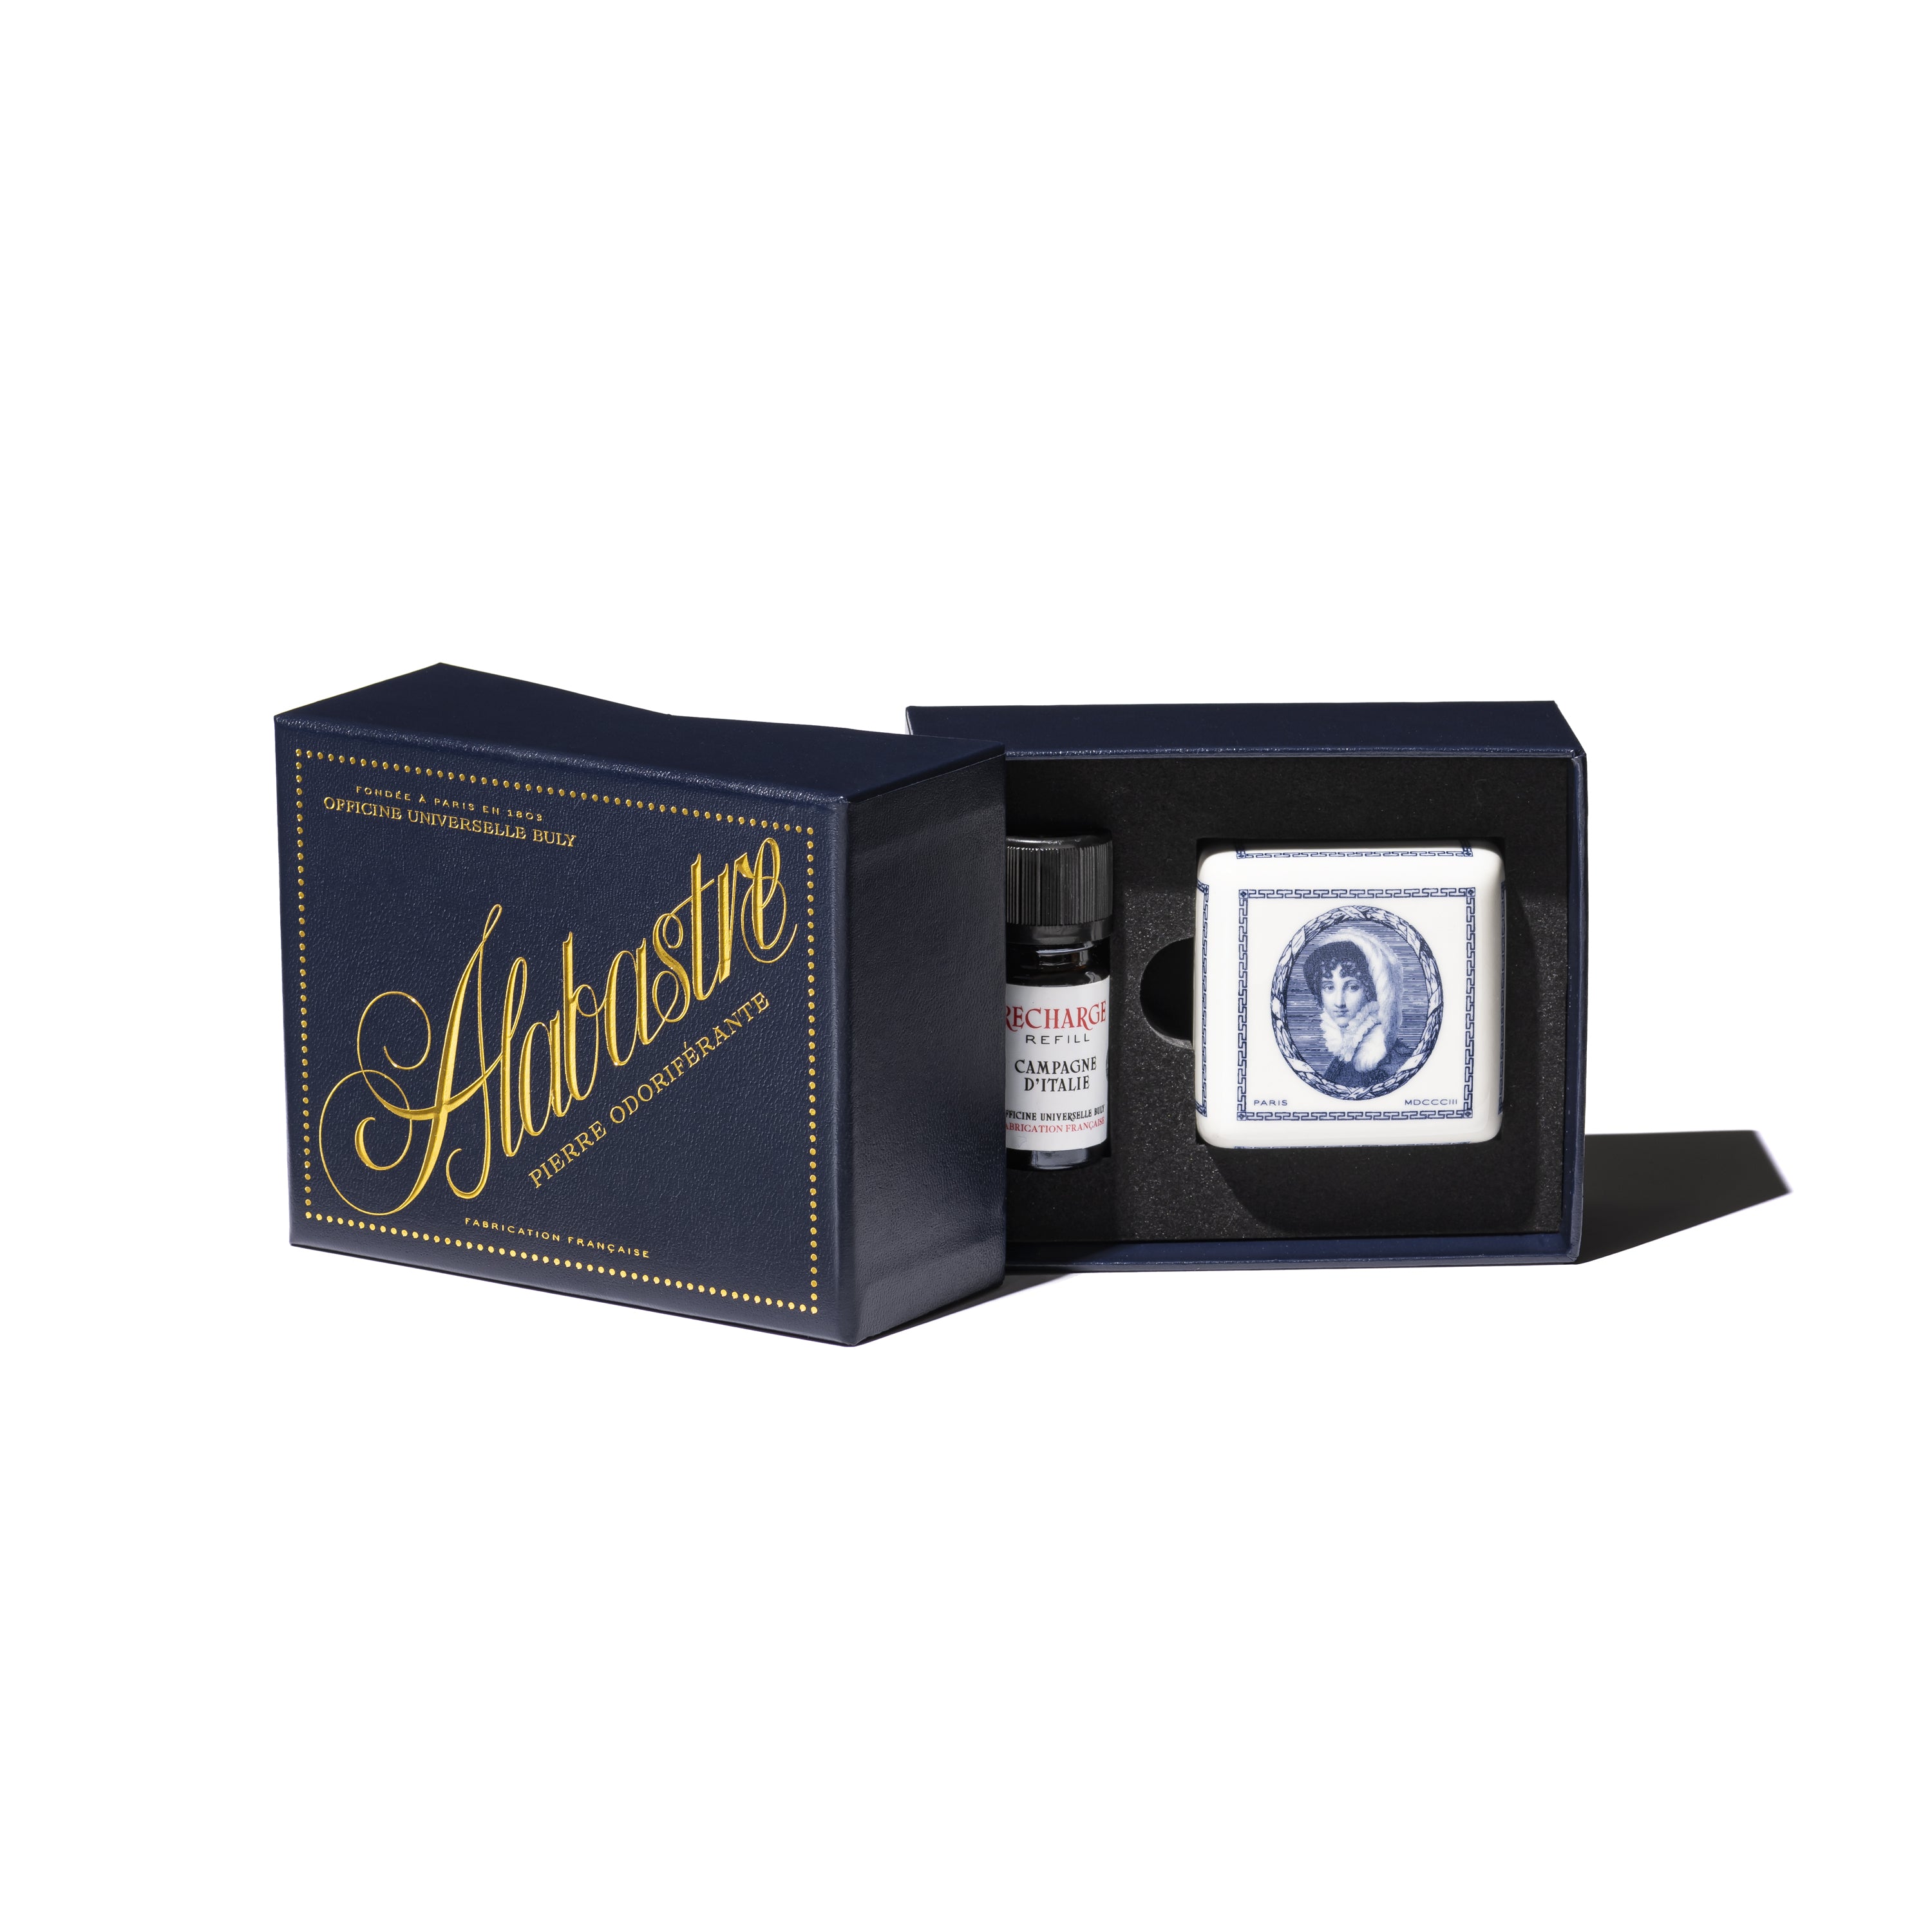 PERFUME ONESELF – Officine Universelle Buly